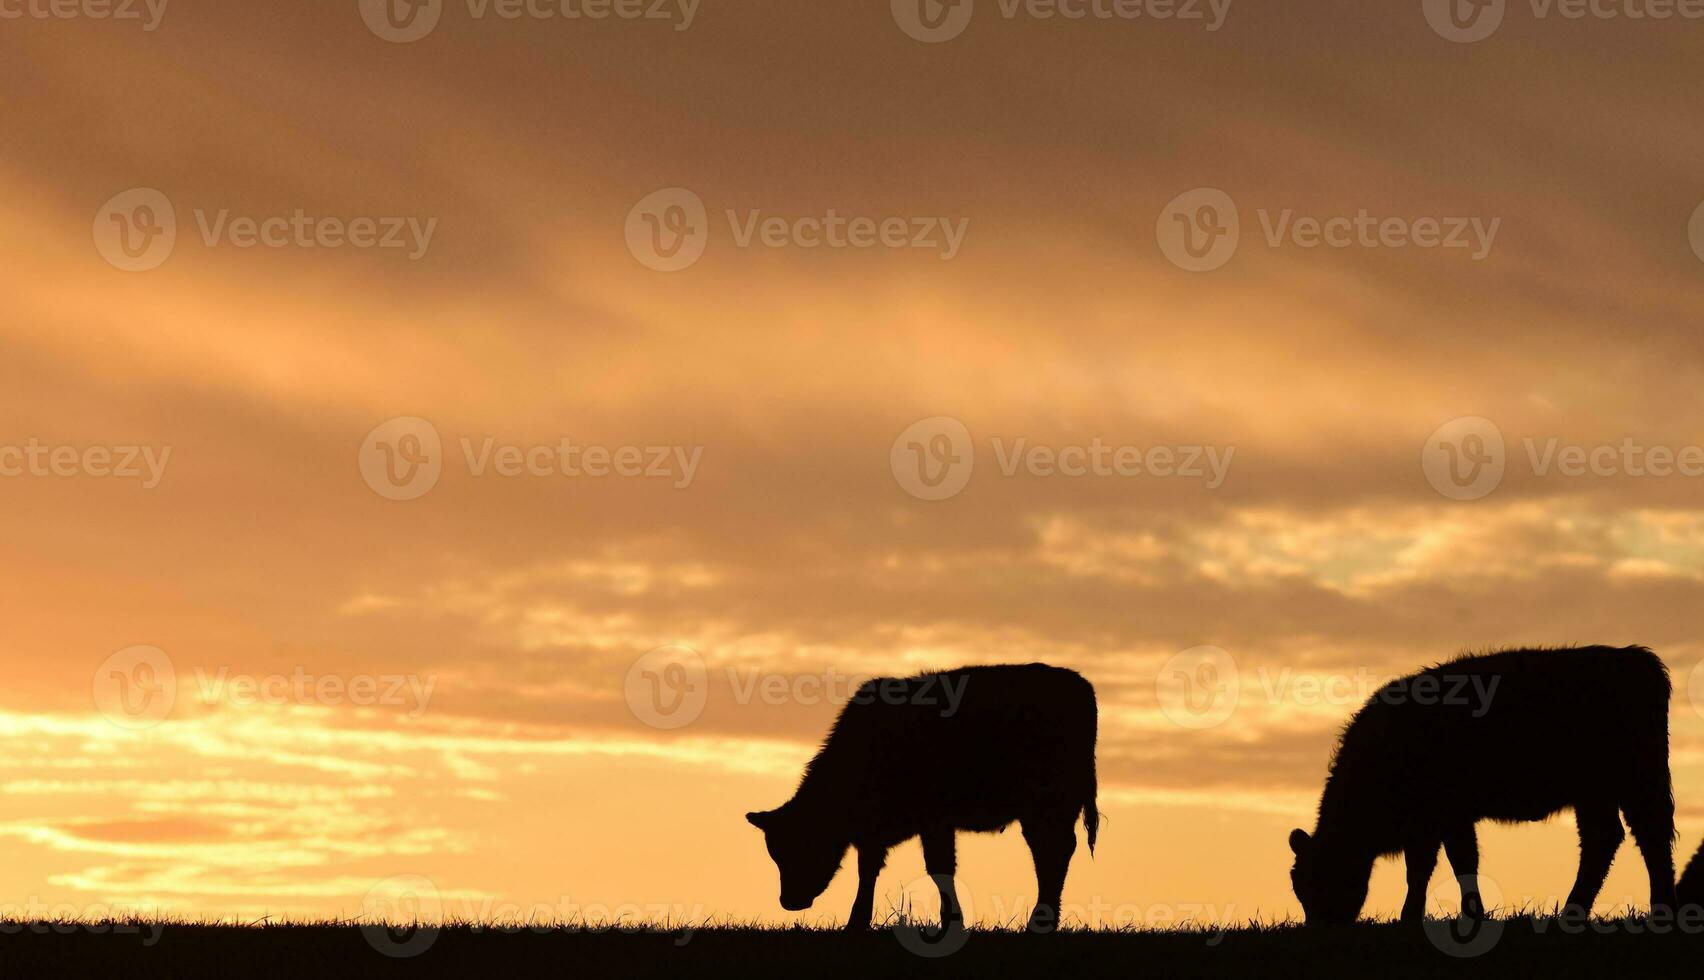 Cows fed  grass, in countryside, Pampas, Patagonia,Argentina photo